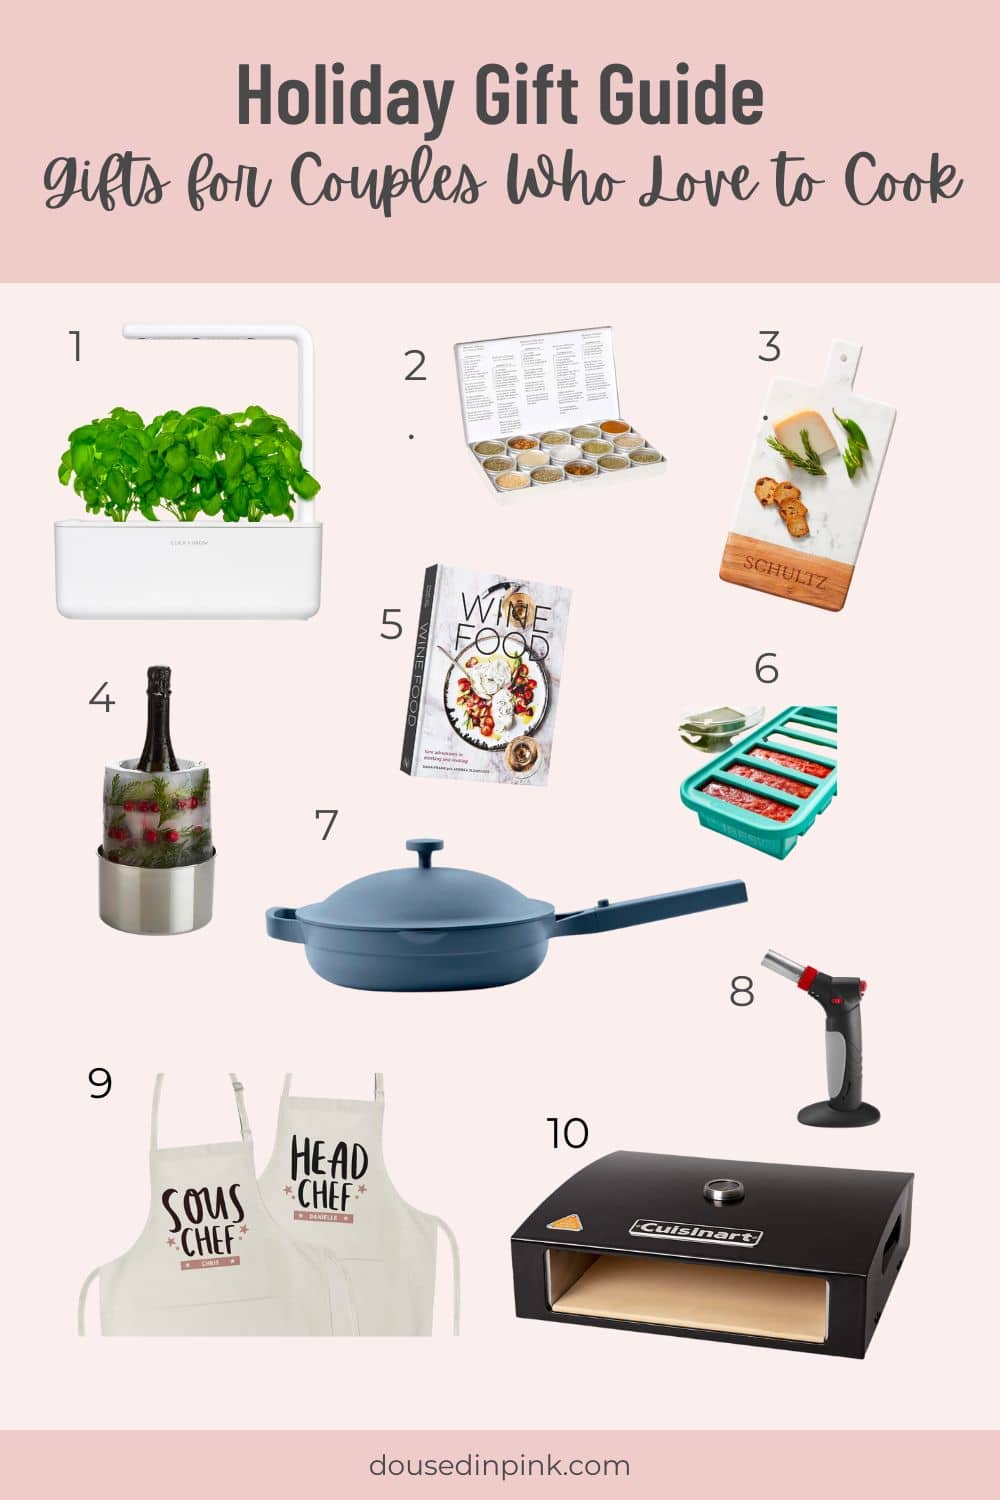 gifts for couples who love to cook together